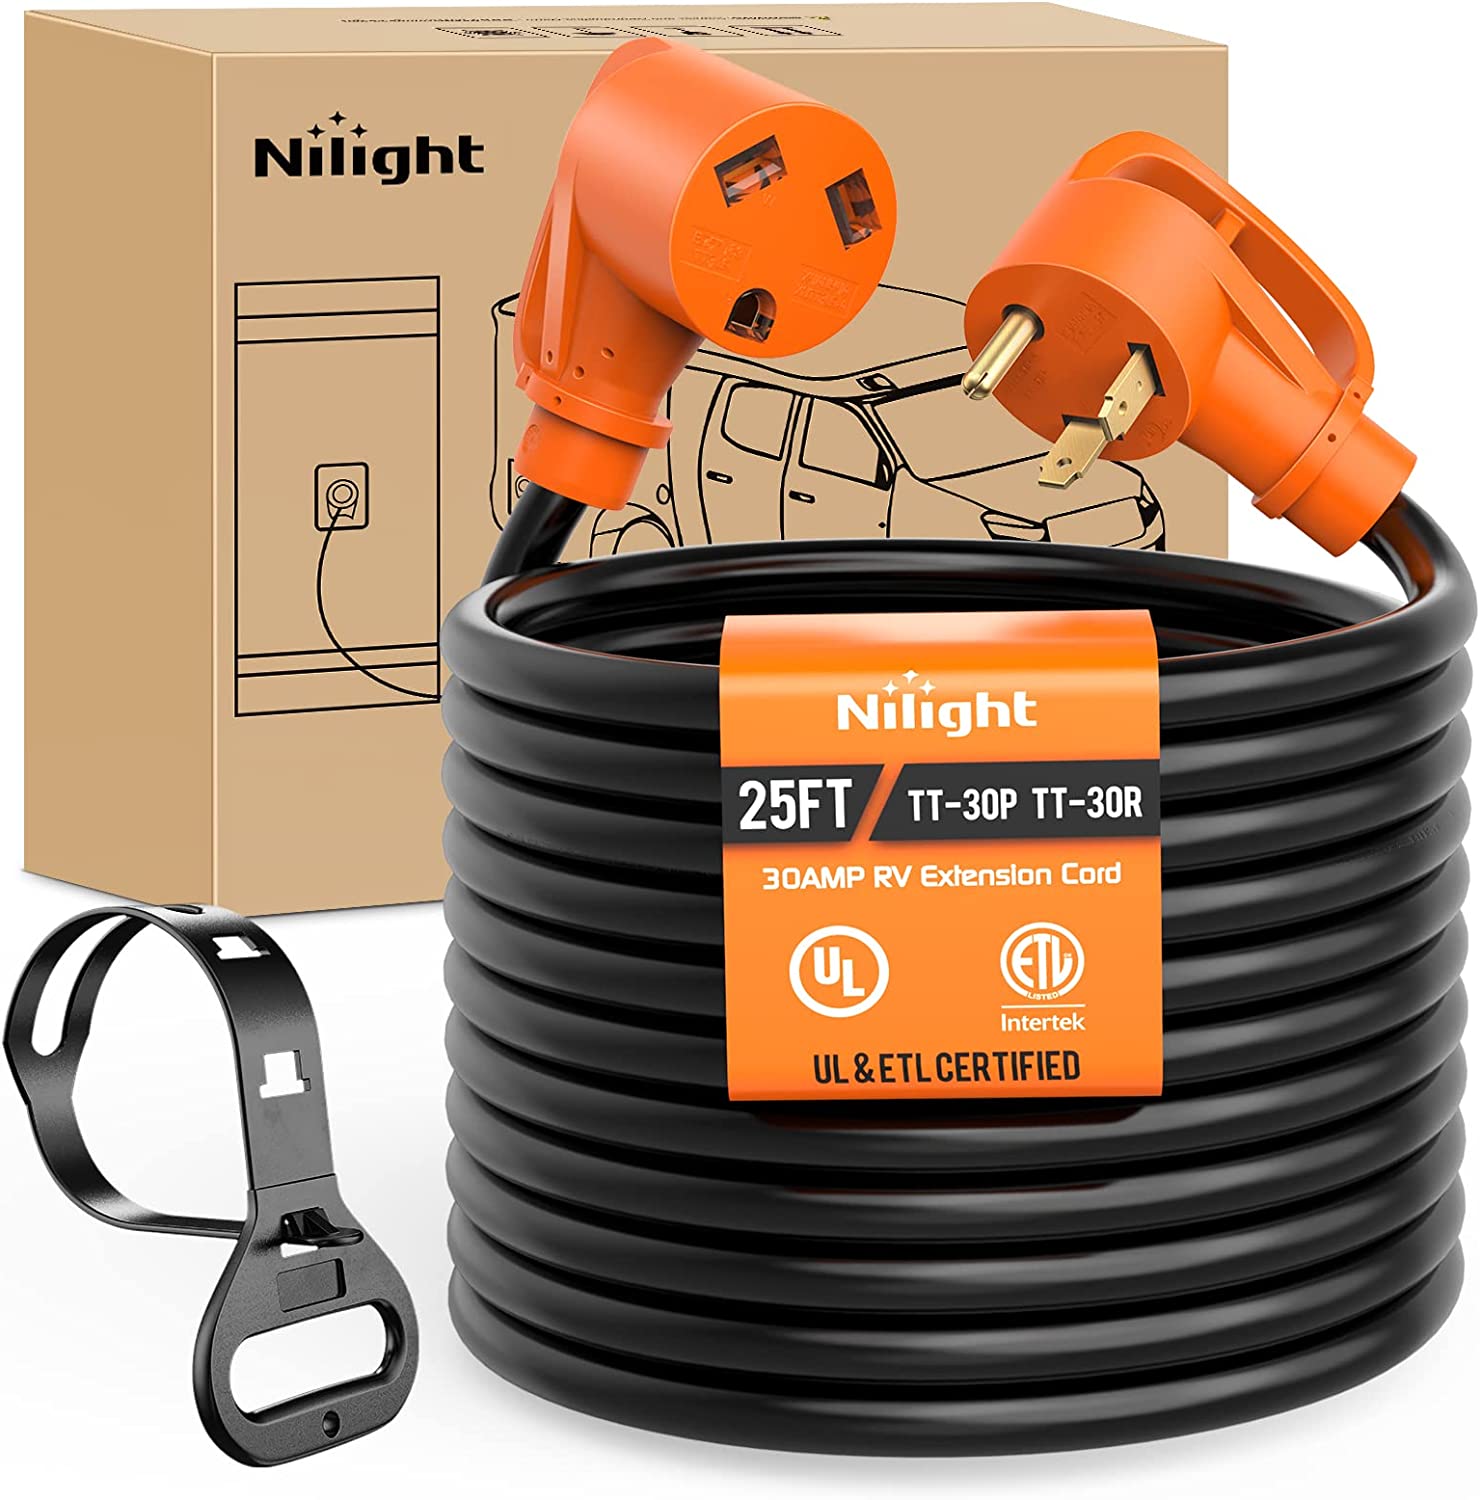 30Amp 25FT RV Extension Cord Nilight